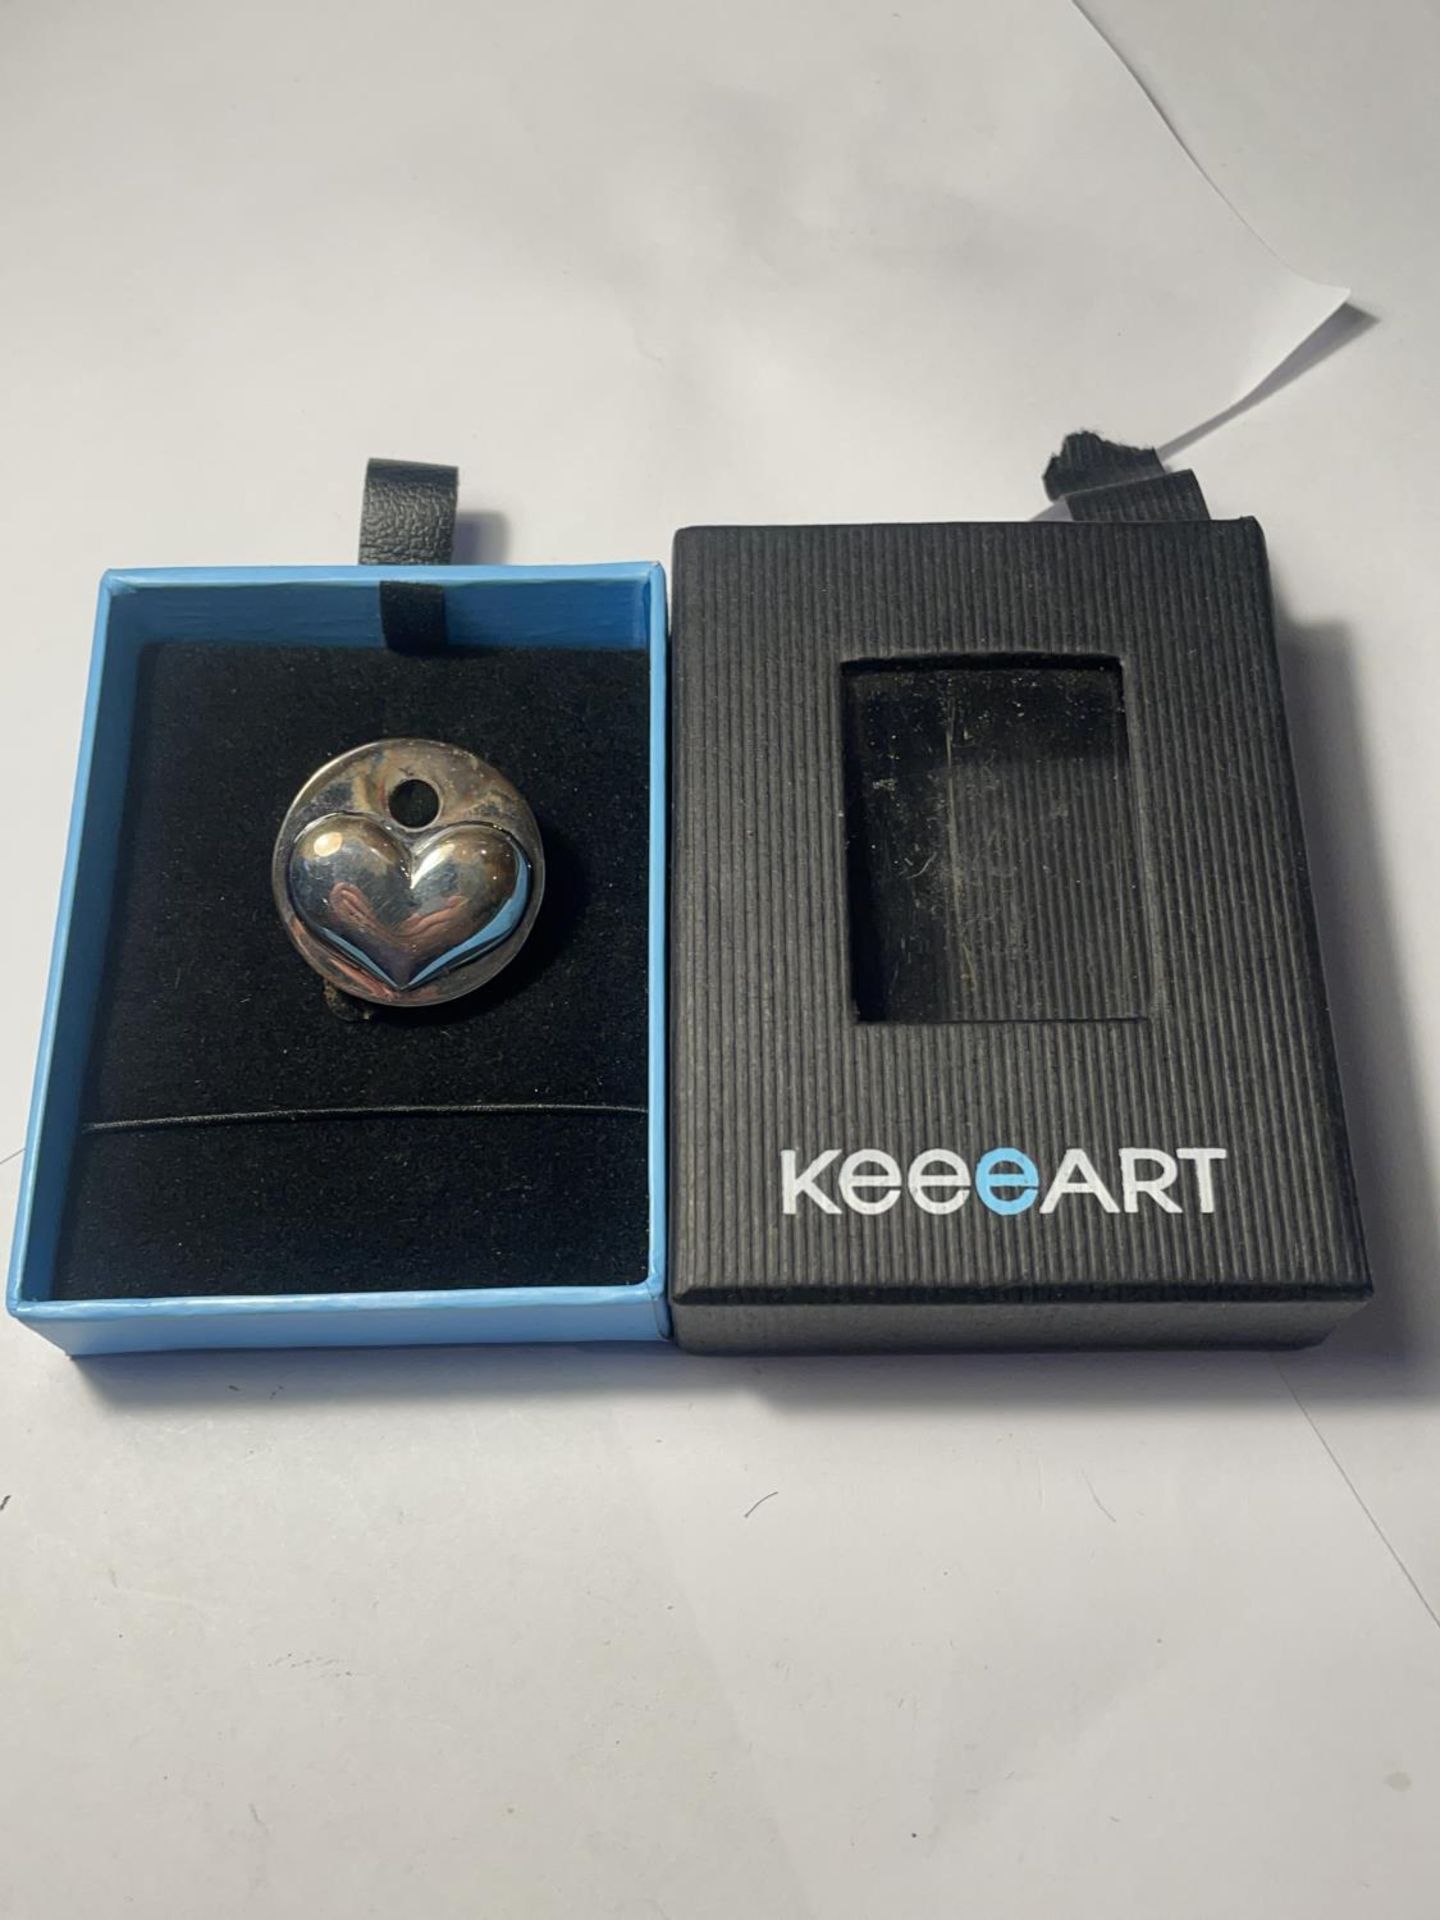 A MARKED 925 SILVER KEY COVER IN A PRESENTATION BOX